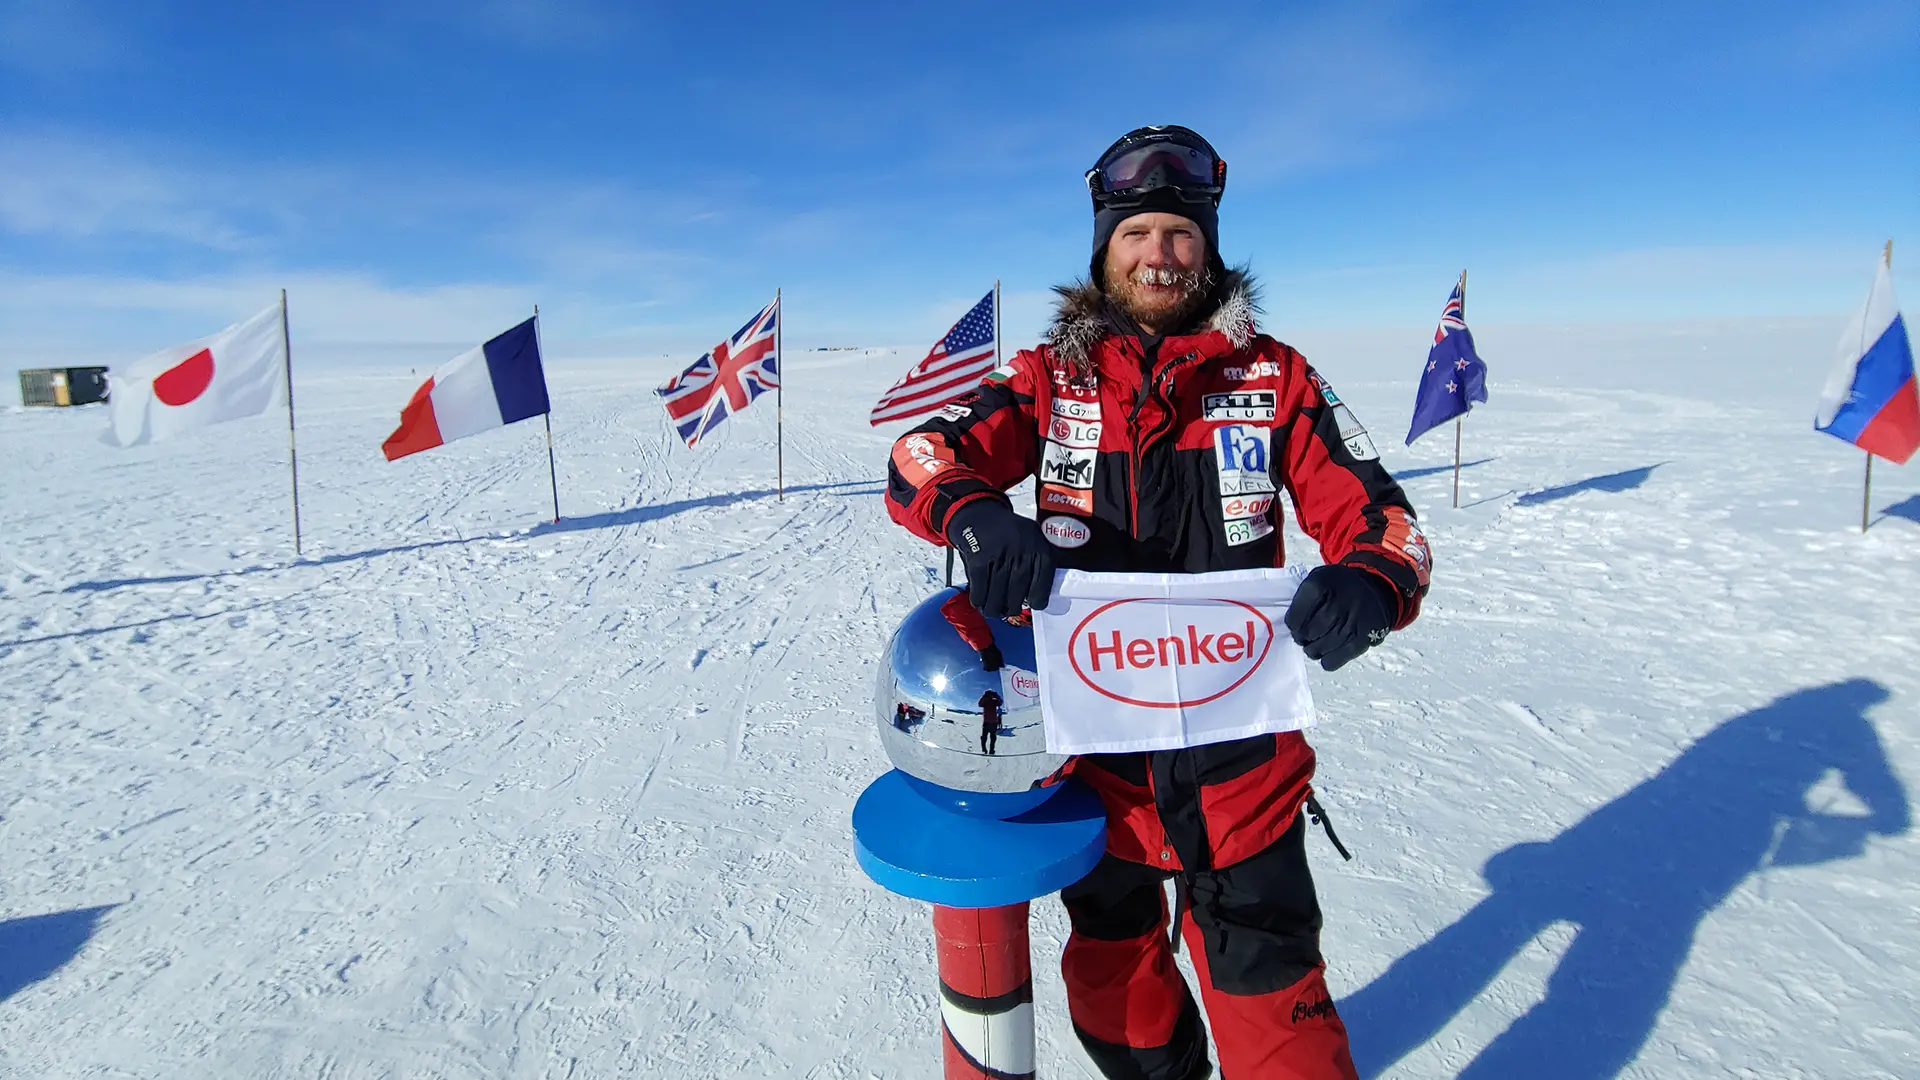 After 44 long days, Gabor achieved his biggest goal yet: He became the first Hungarian to ever reach the South Pole